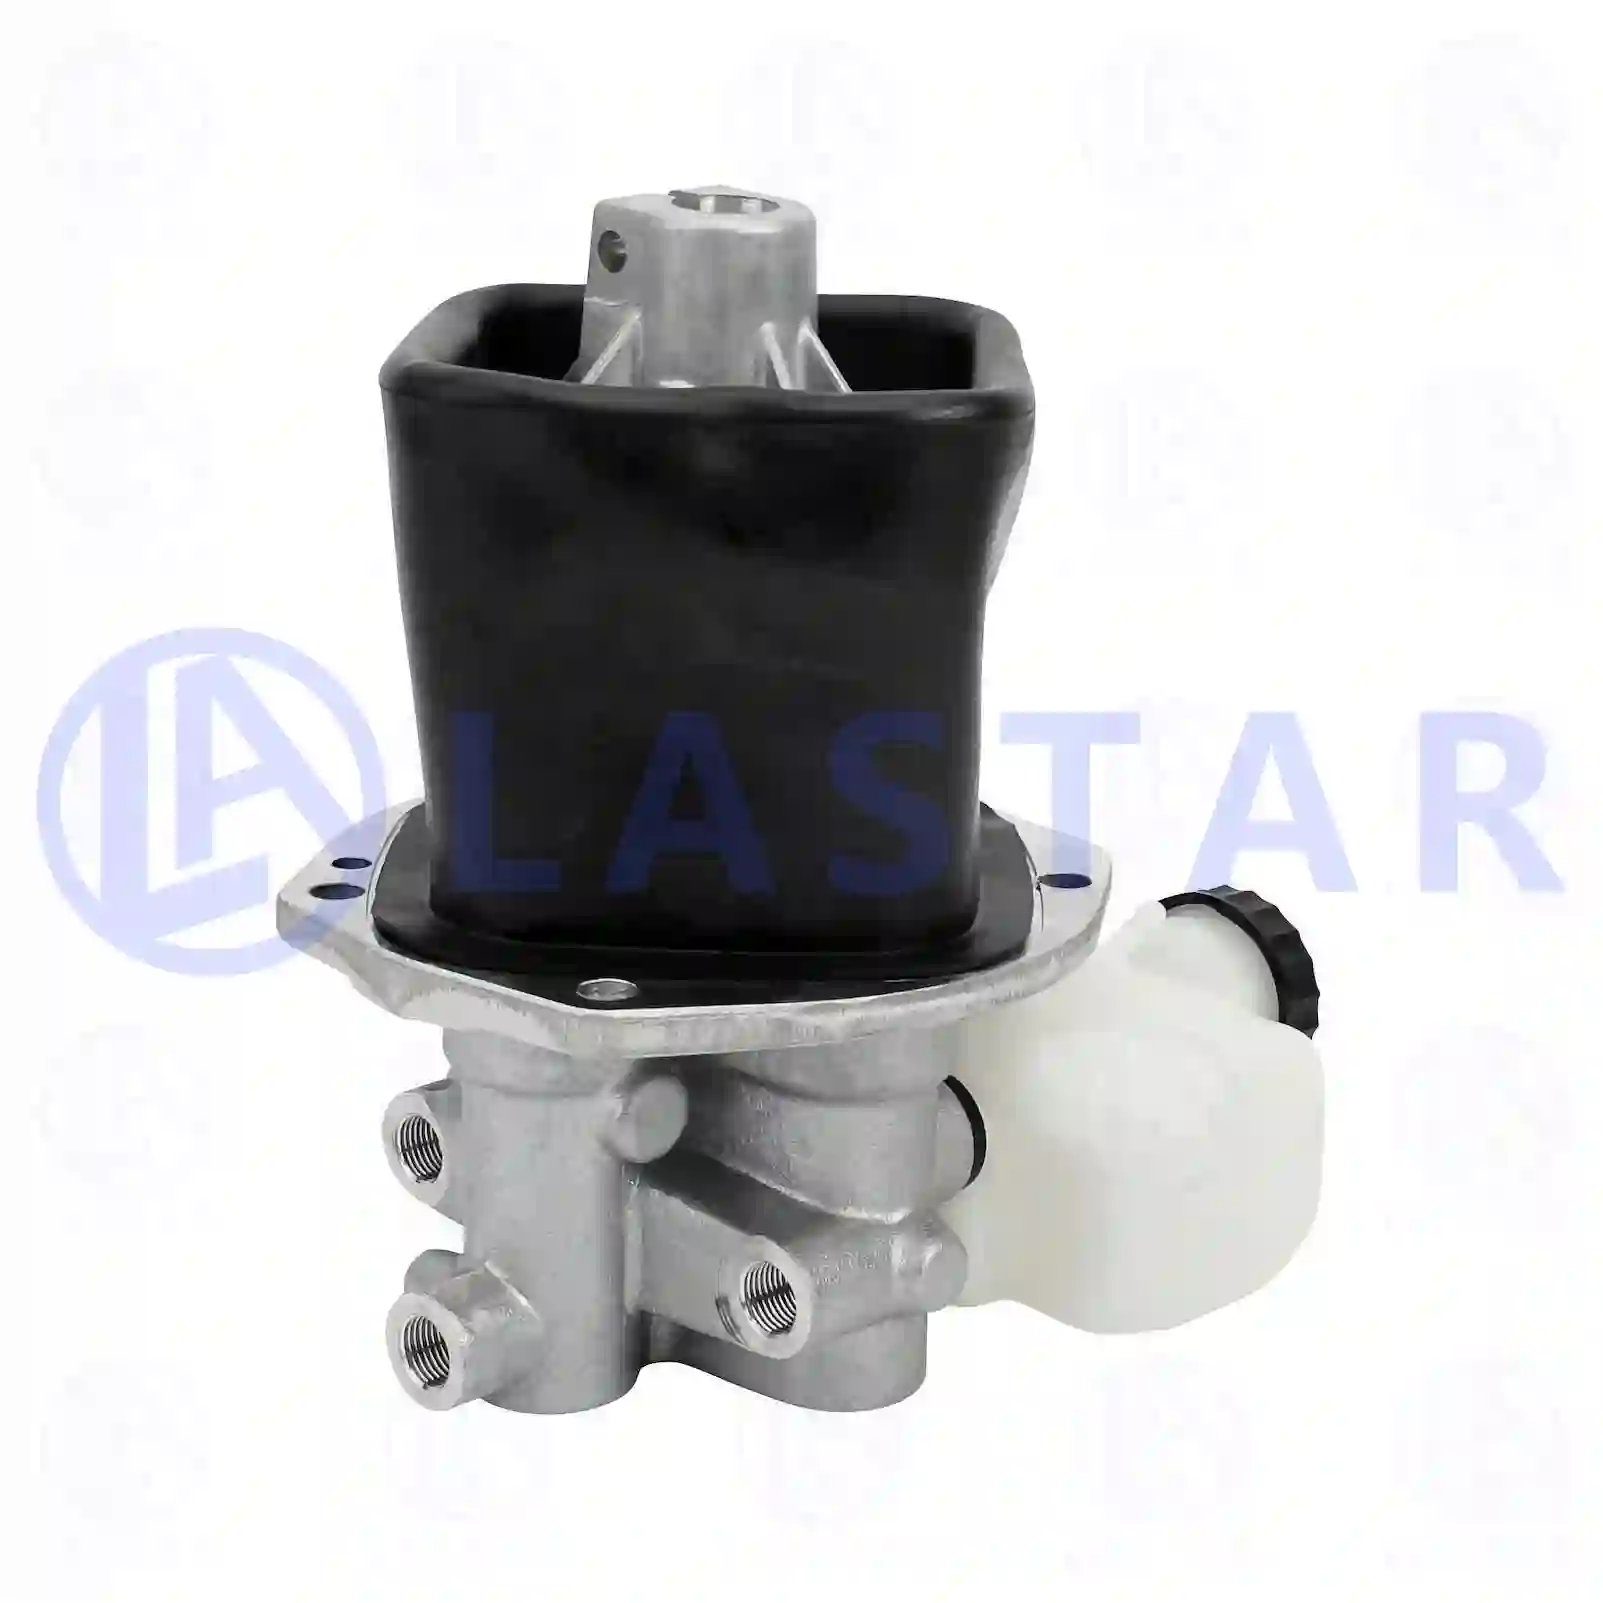 Switching device, gear shift lever, 77732598, 2604098, 00026071 ||  77732598 Lastar Spare Part | Truck Spare Parts, Auotomotive Spare Parts Switching device, gear shift lever, 77732598, 2604098, 00026071 ||  77732598 Lastar Spare Part | Truck Spare Parts, Auotomotive Spare Parts